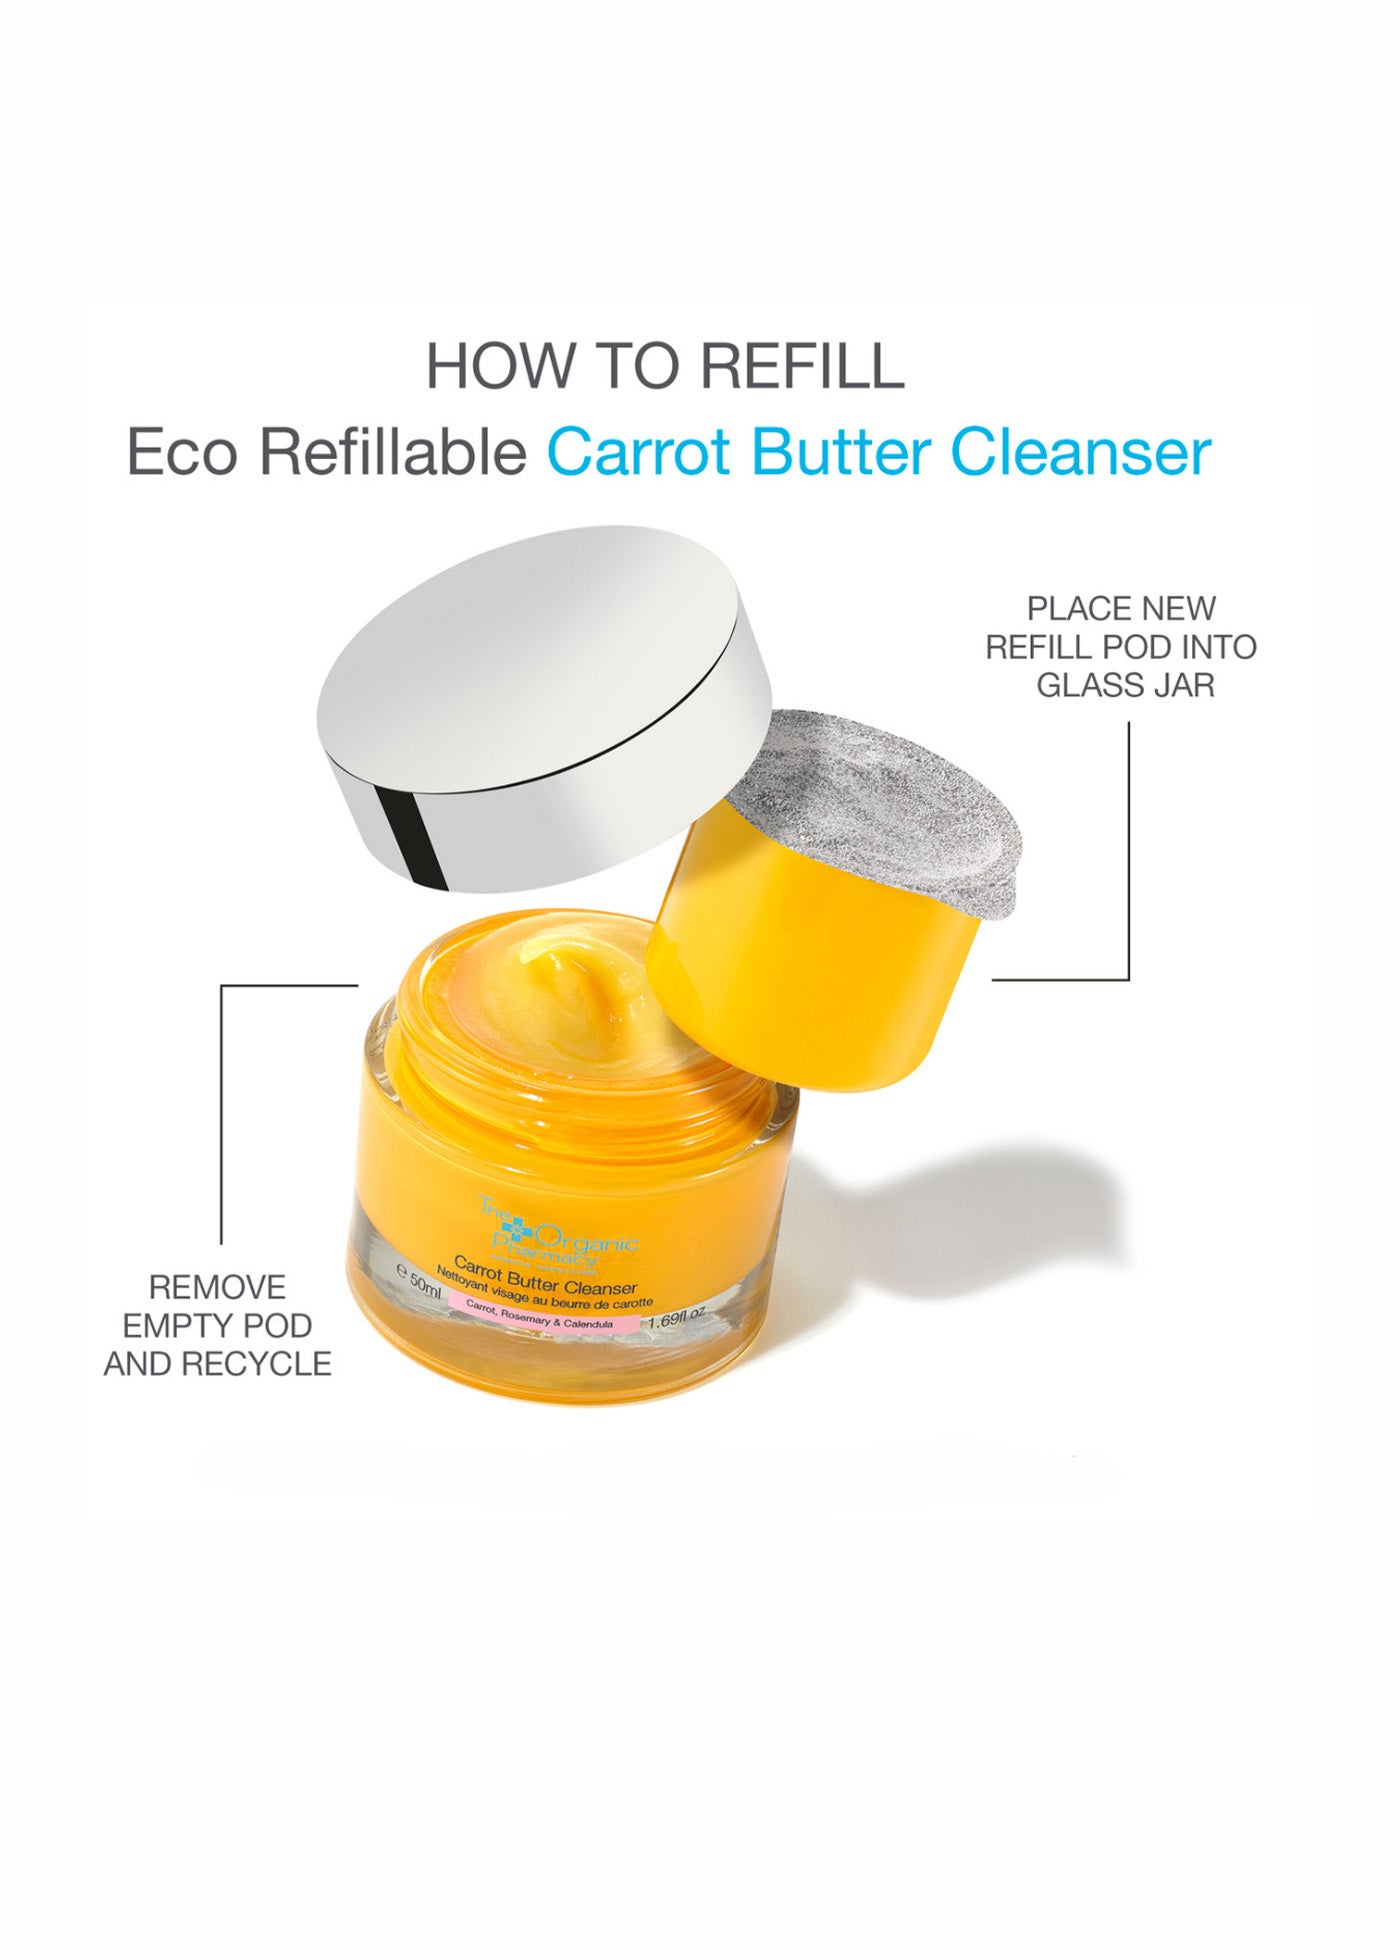 Carrot Butter Cleanser - Eco Refillable